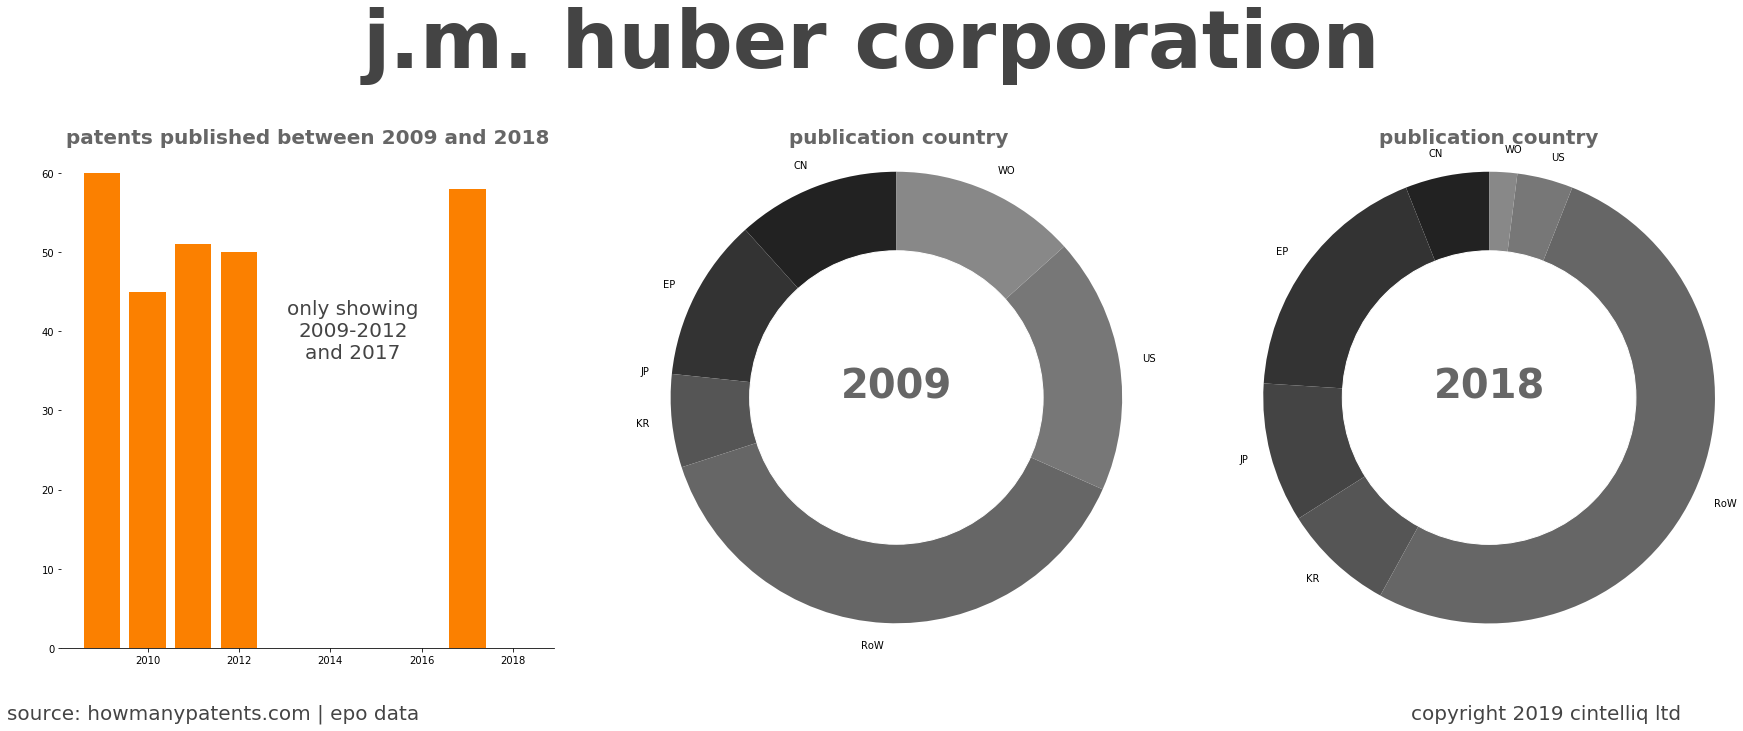 summary of patents for J.M. Huber Corporation